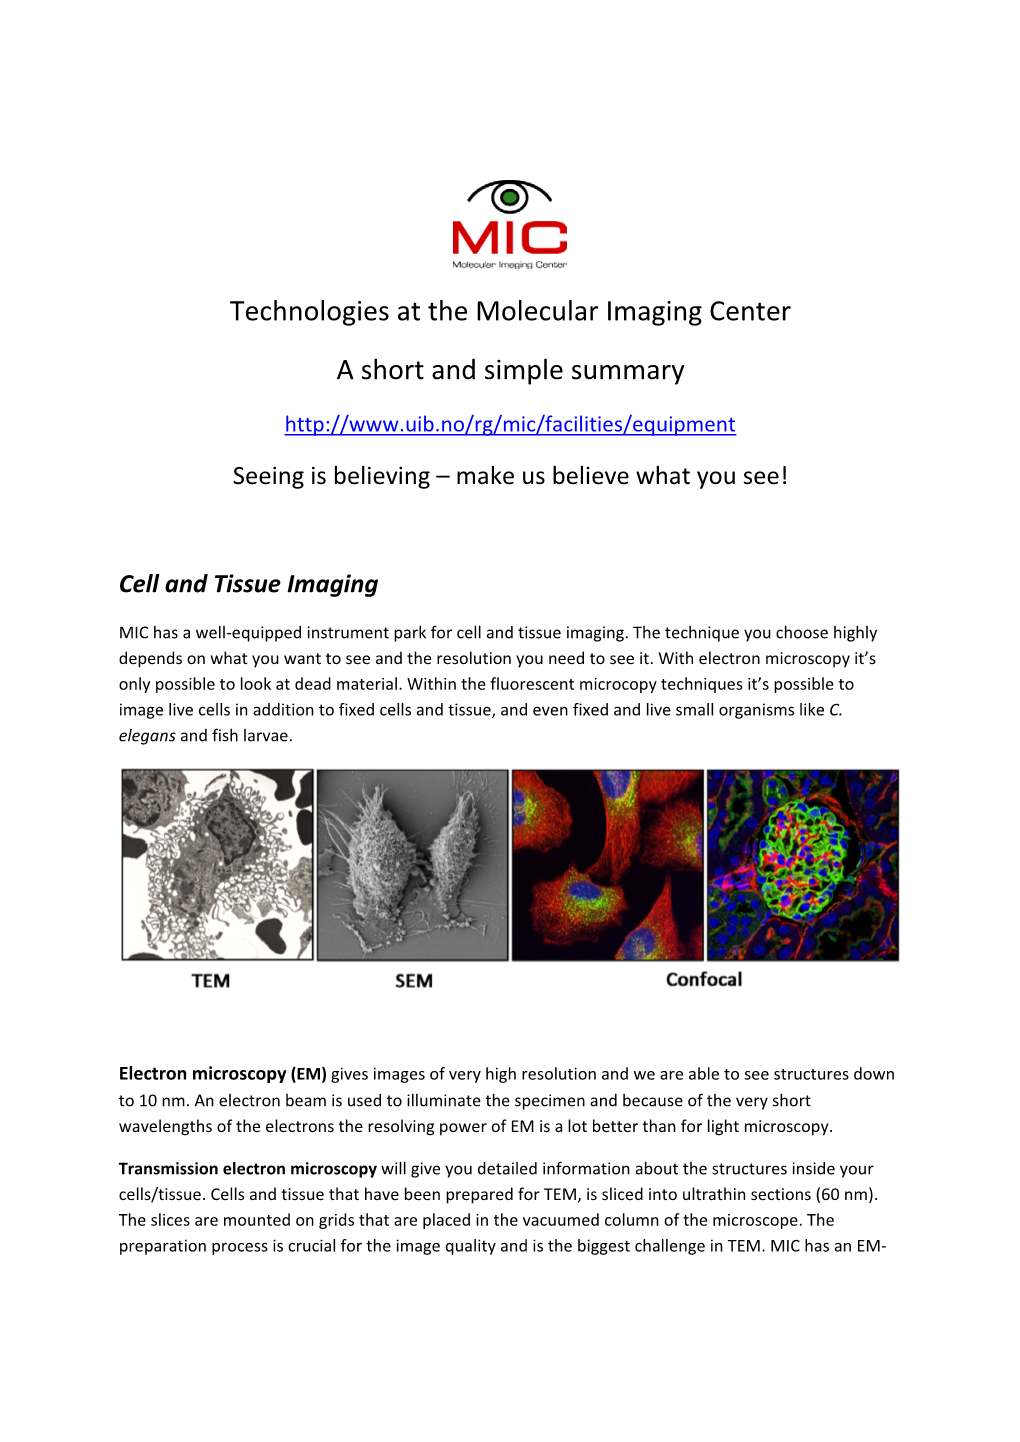 Technologies at the Molecular Imaging Center a Short and Simple Summary